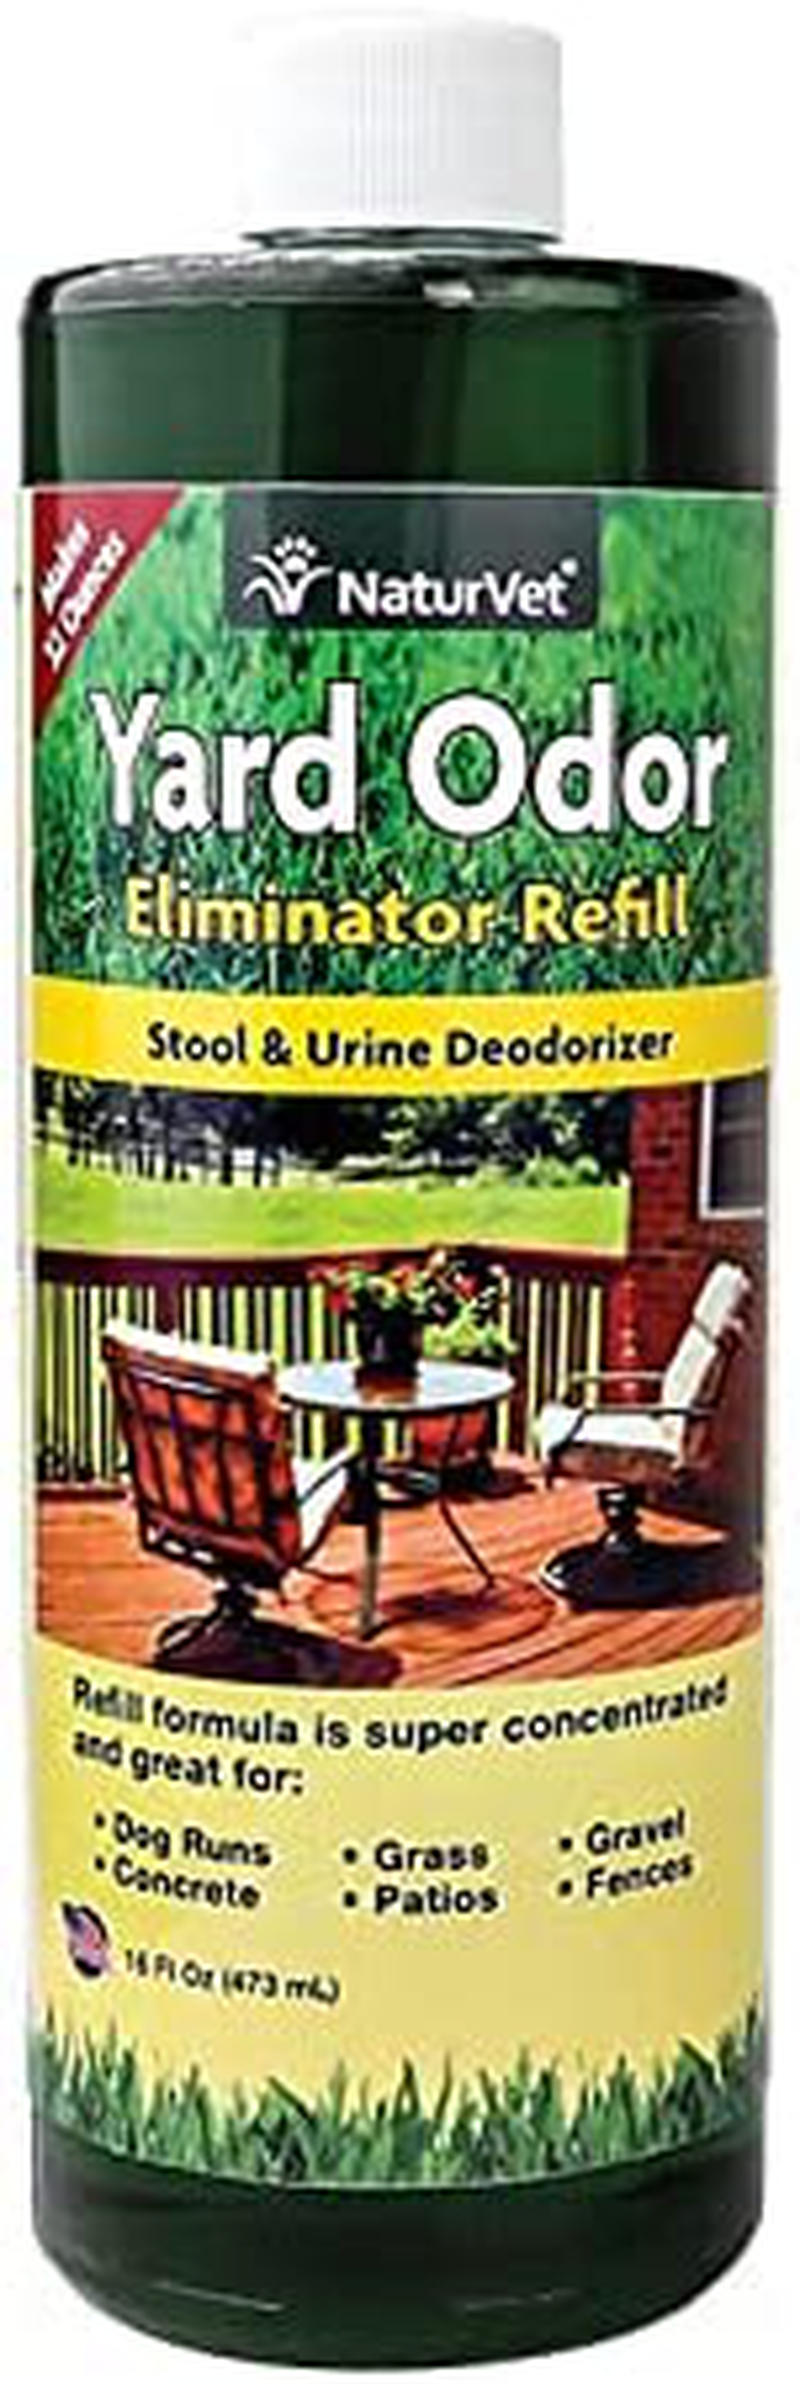 Naturvet – Yard Odor Eliminator – Eliminate Stool and Urine Odors from Lawn and Yard – Designed for Use on Grass, Plants, Patios, Gravel, Concrete & More